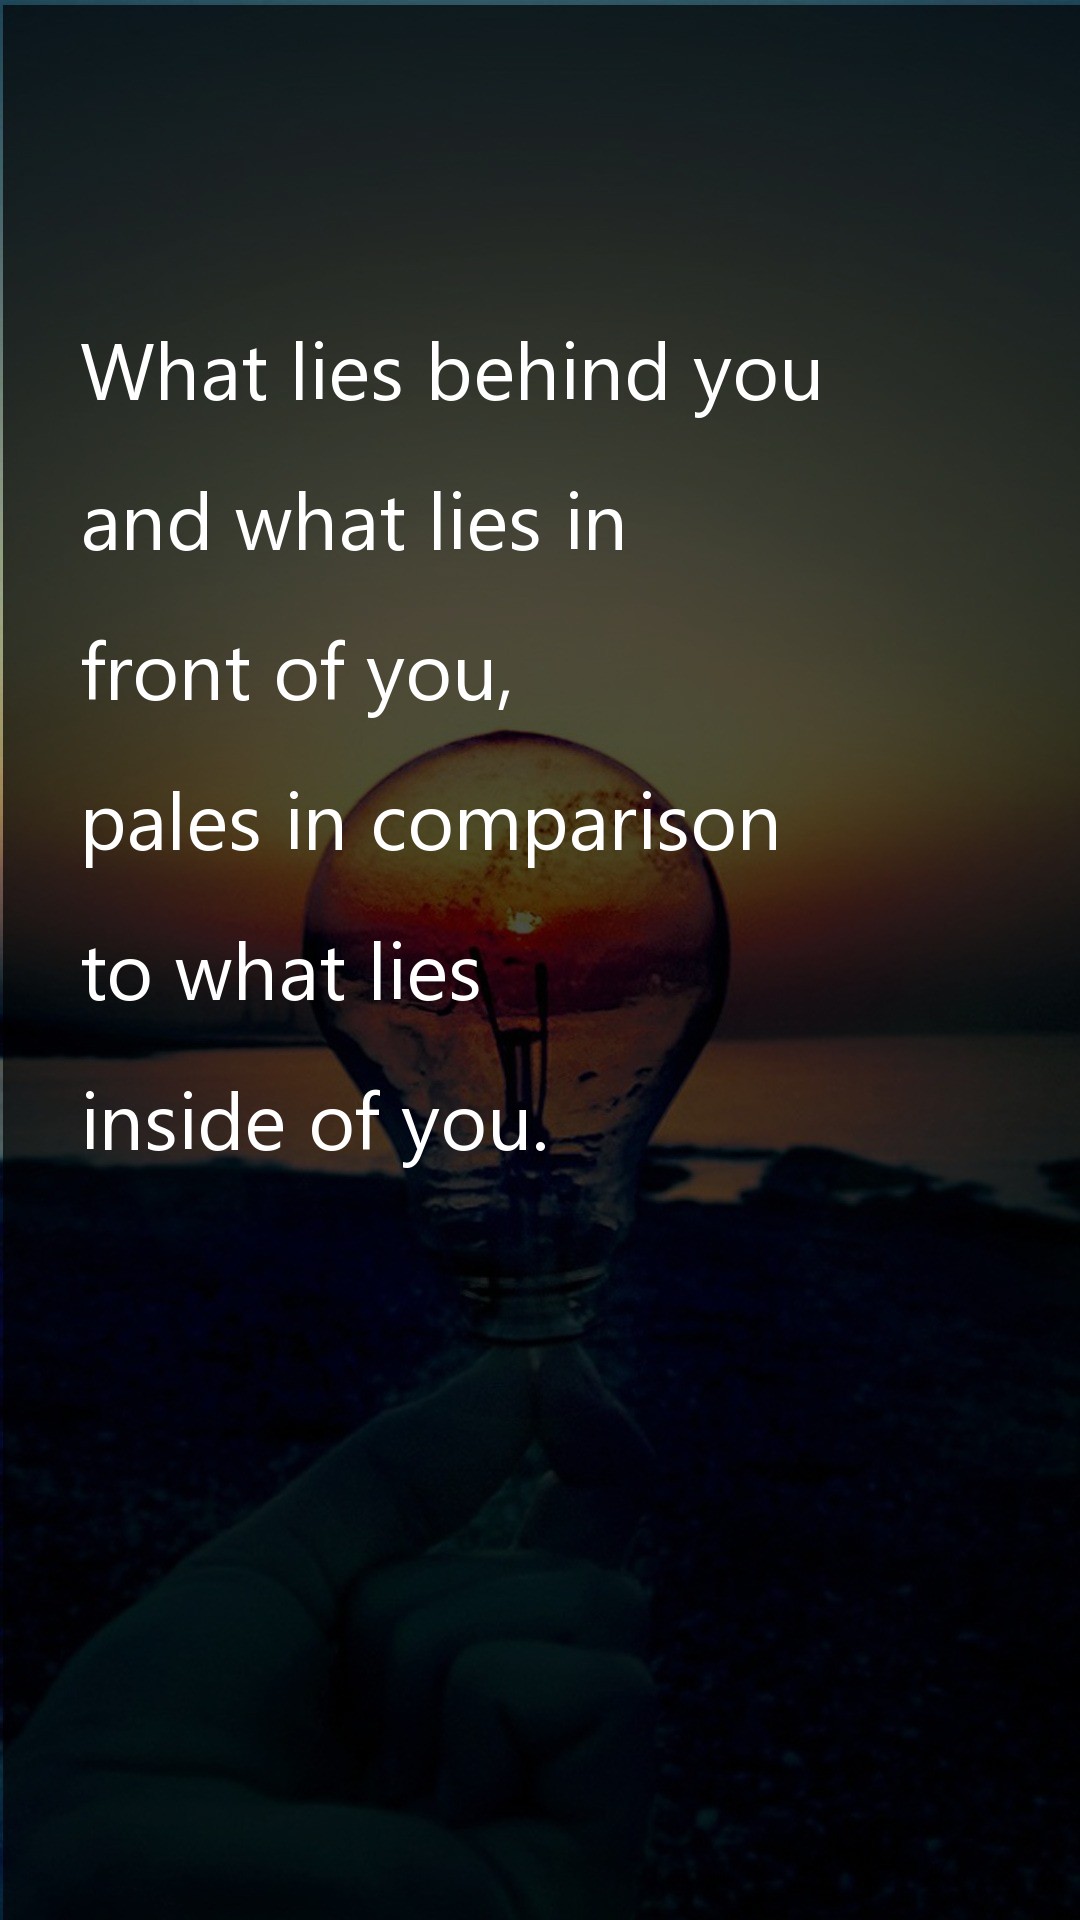 What lies behind you - Inspiration Quotes at statush.com